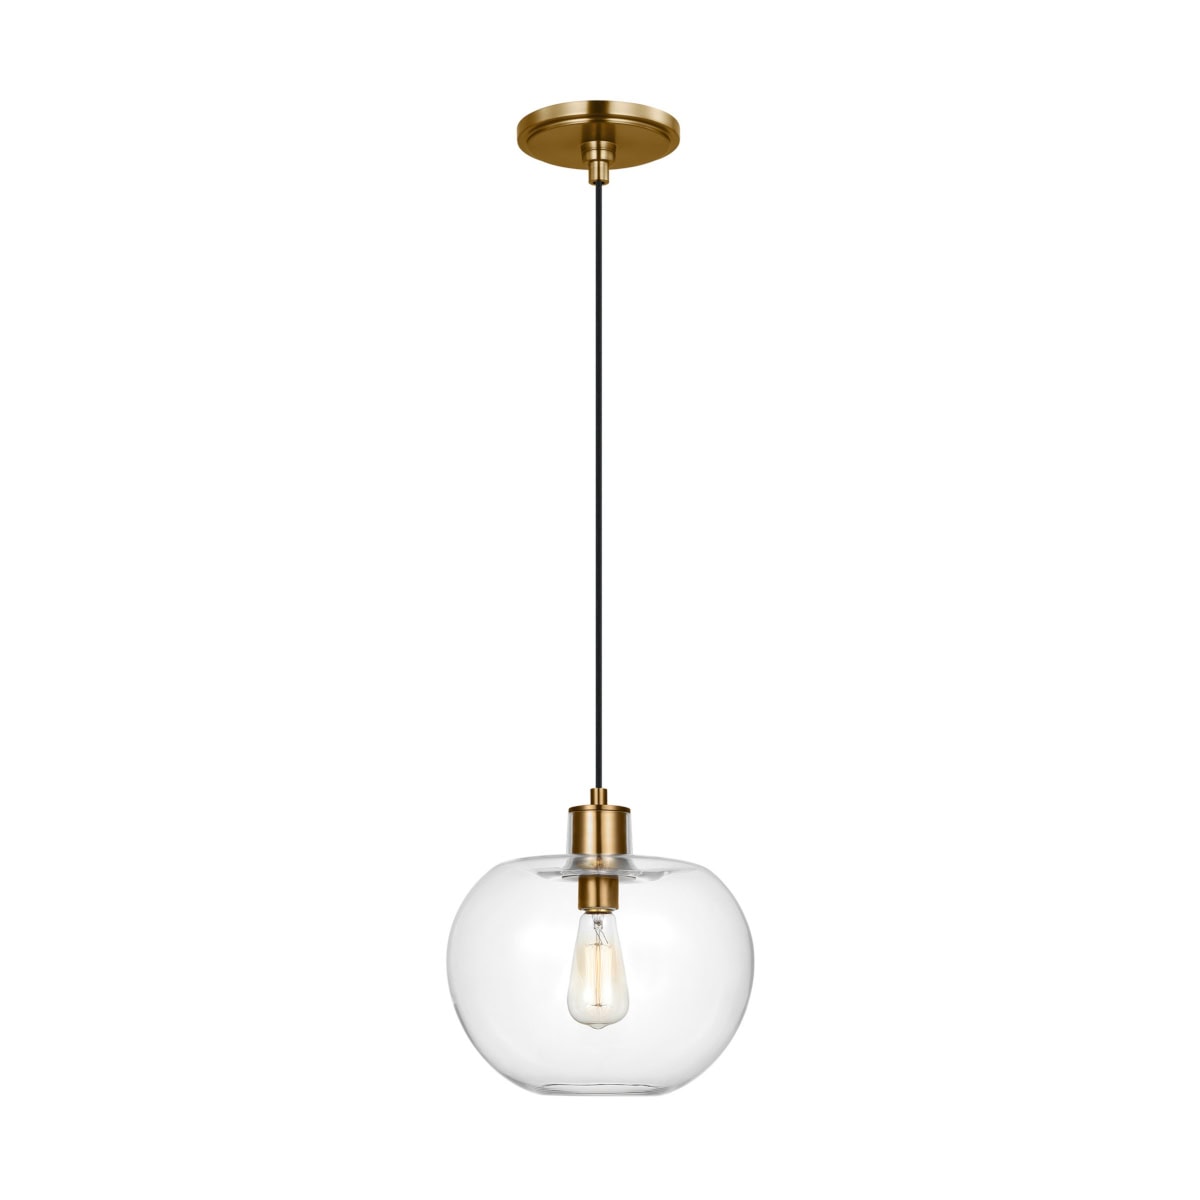 Product image of Mela Mini Pendant brass with clear glass